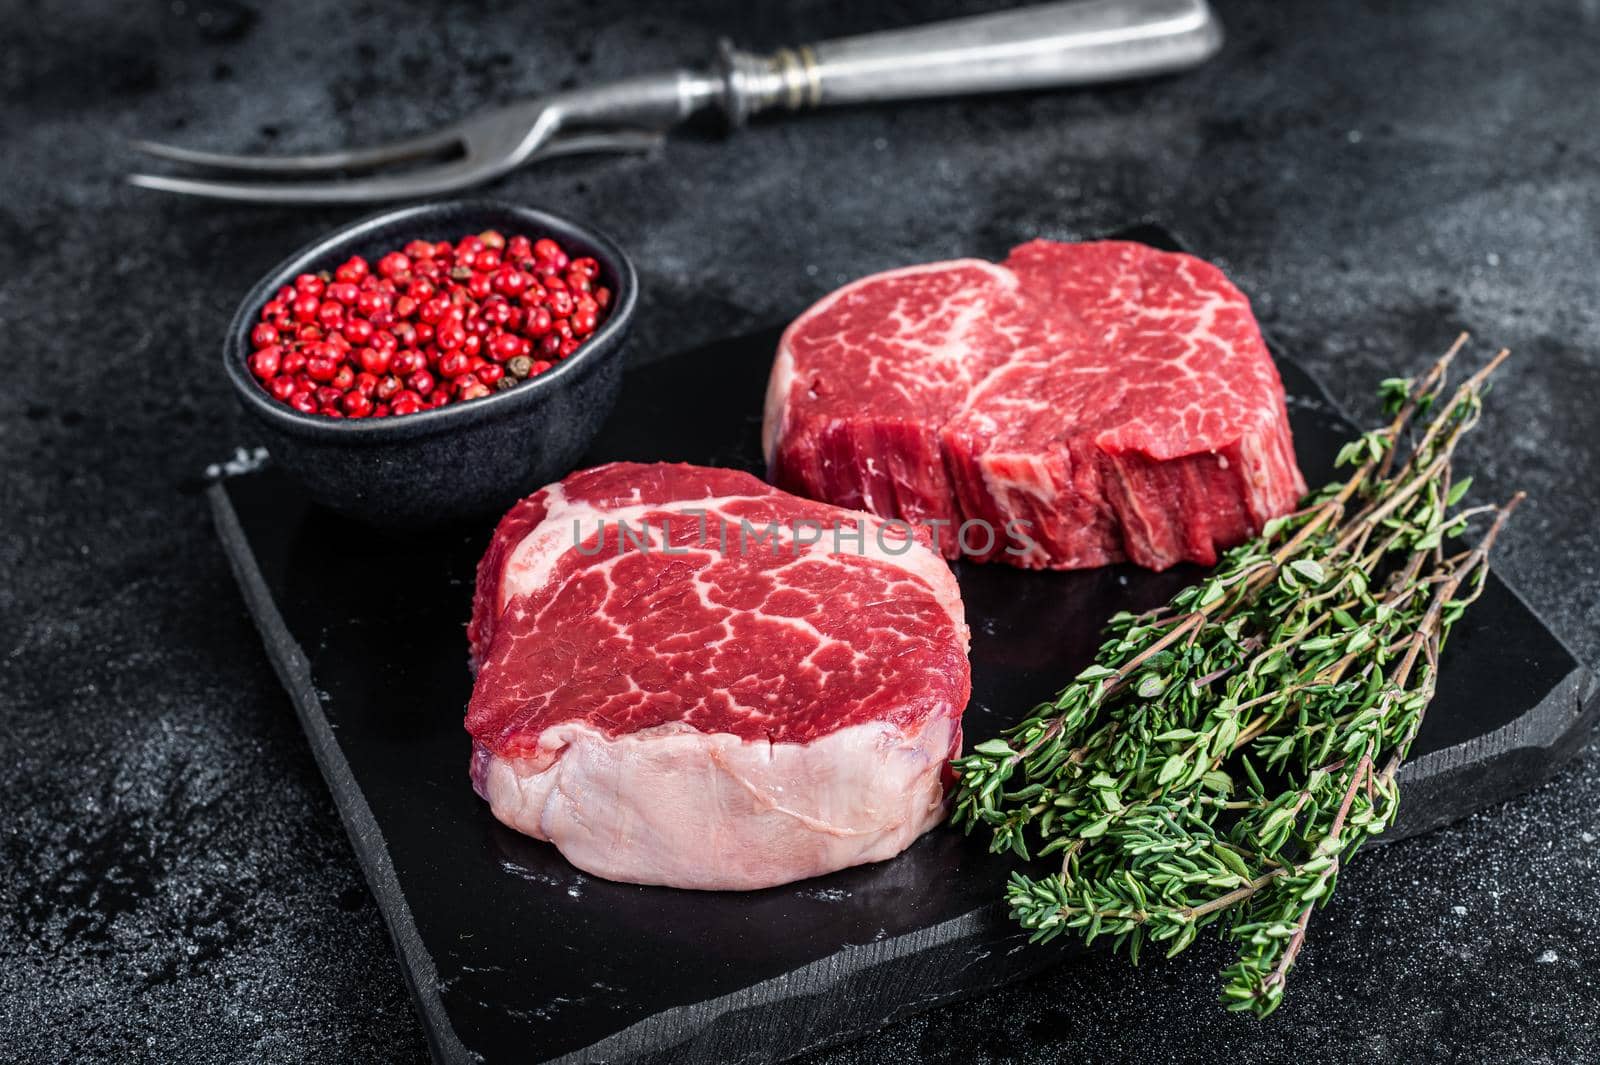 Prime Raw Fillet Mignon tenderloin steaks with thyme. Black background. Top view.